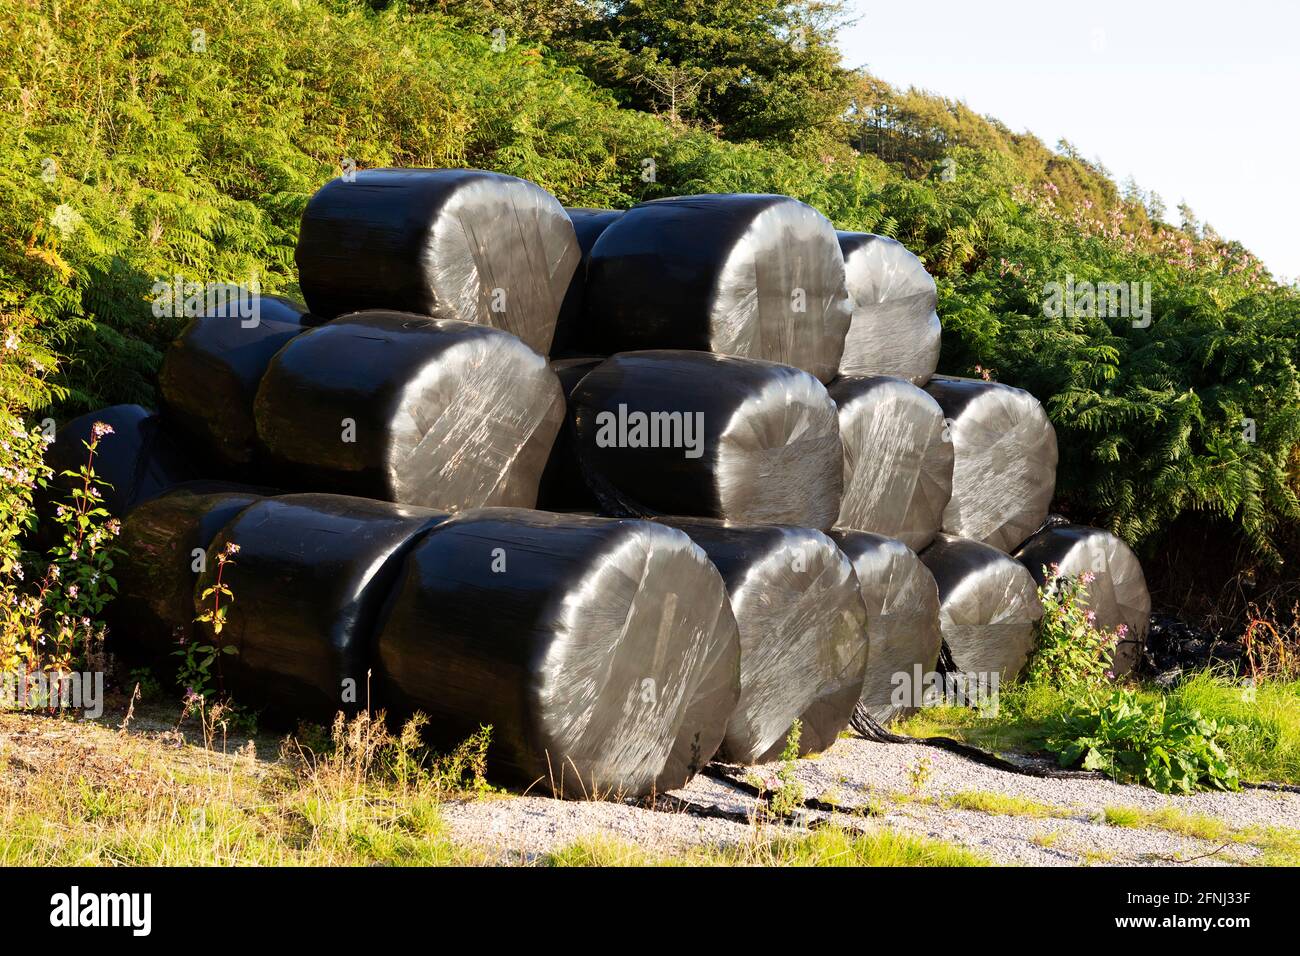 Hay bales wrapped in black plastic in Cumbria, England. The plastic protects the round bales from the elements. Stock Photo